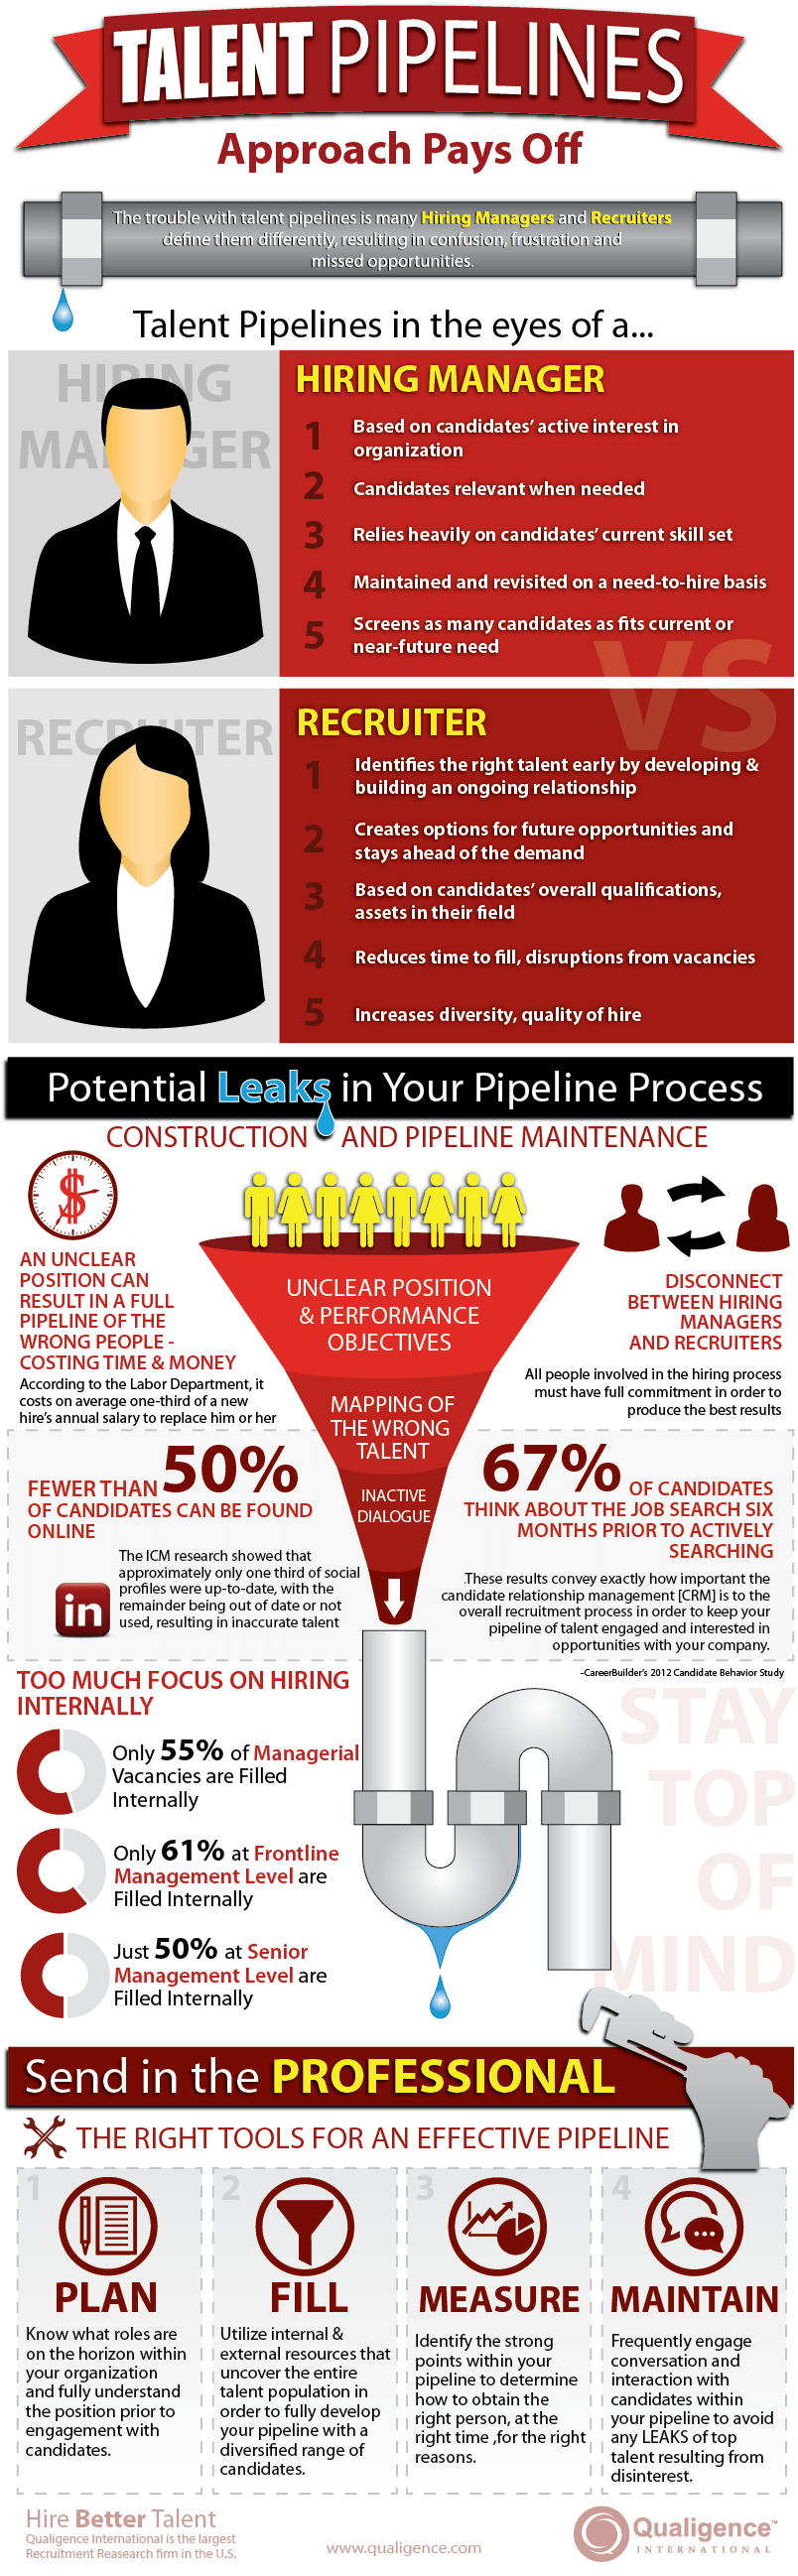 talent pipelines